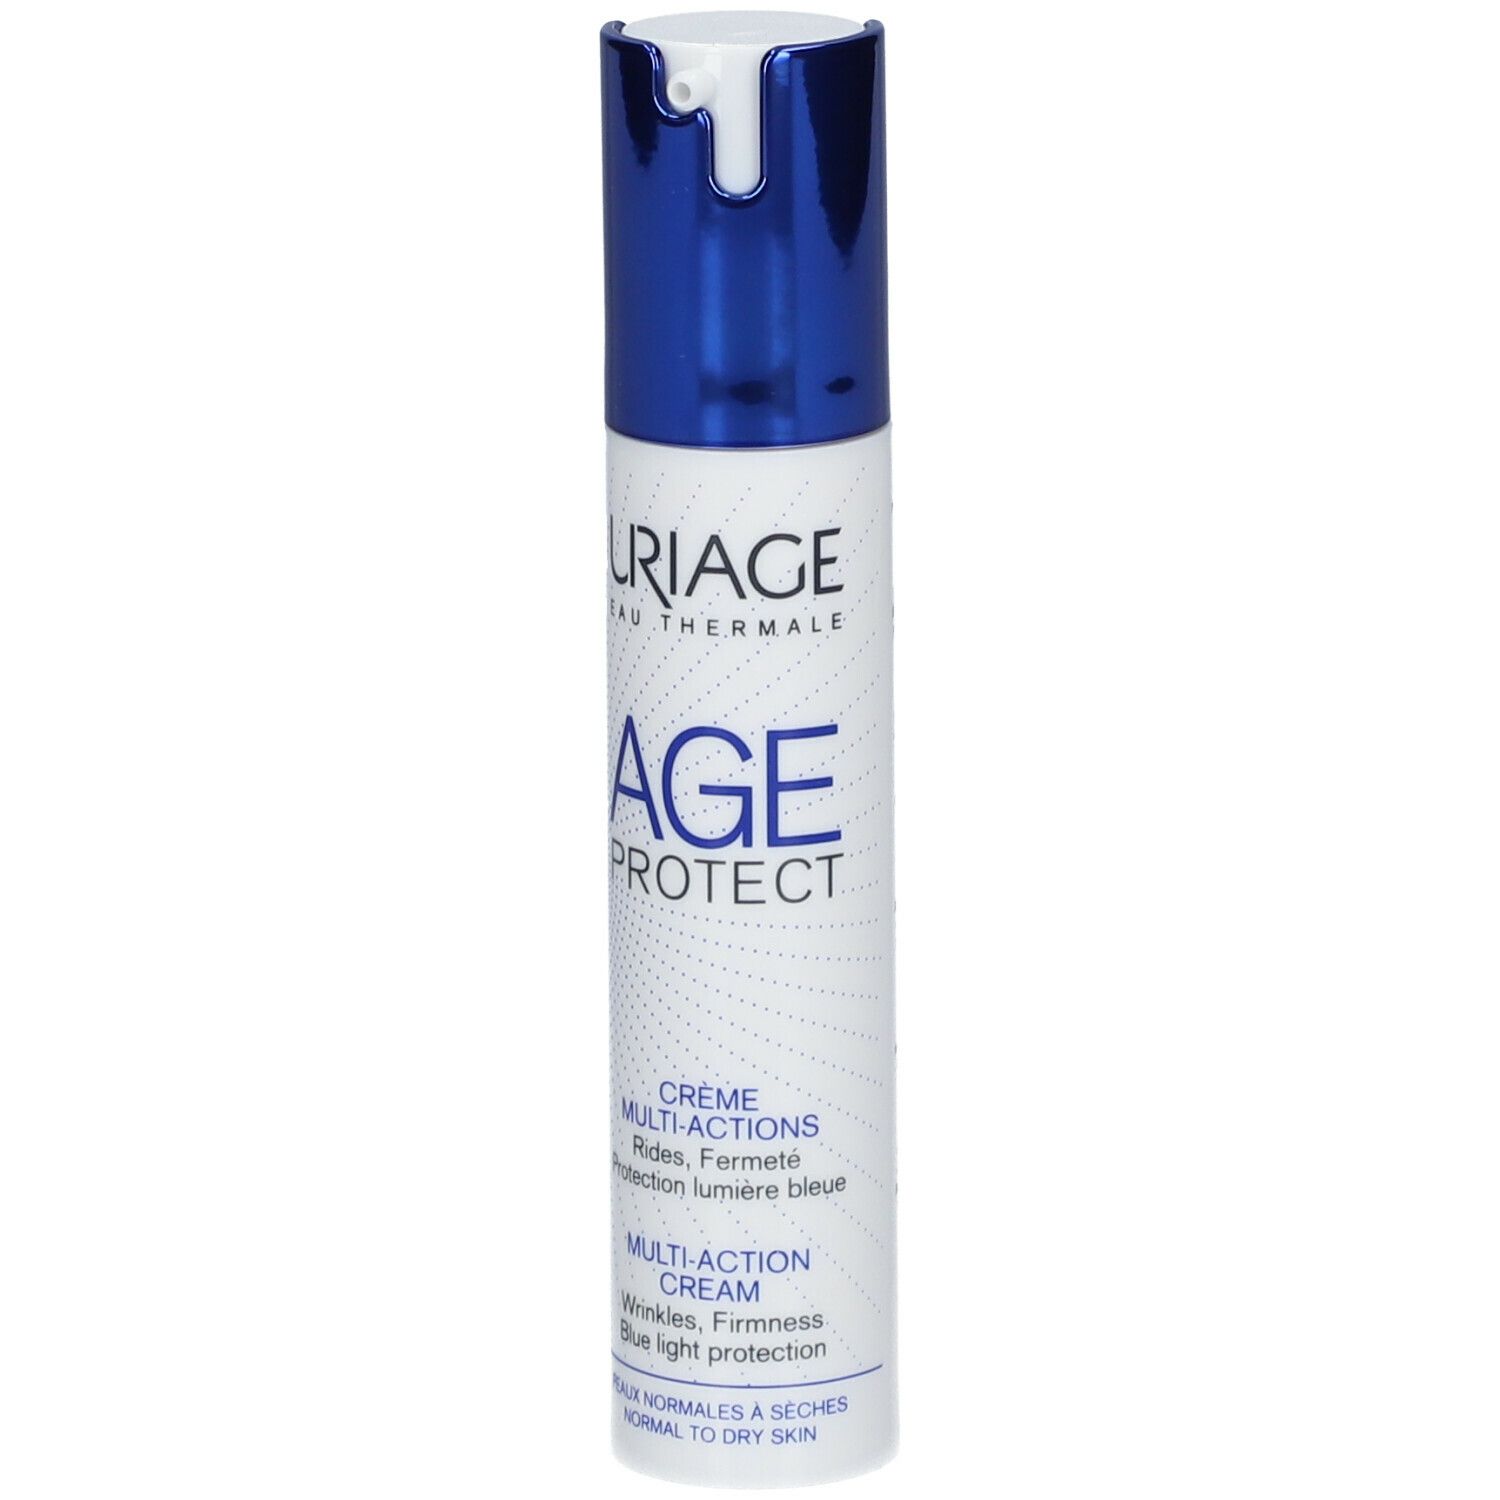 Uriage Age Protect Crème Multi-Actions